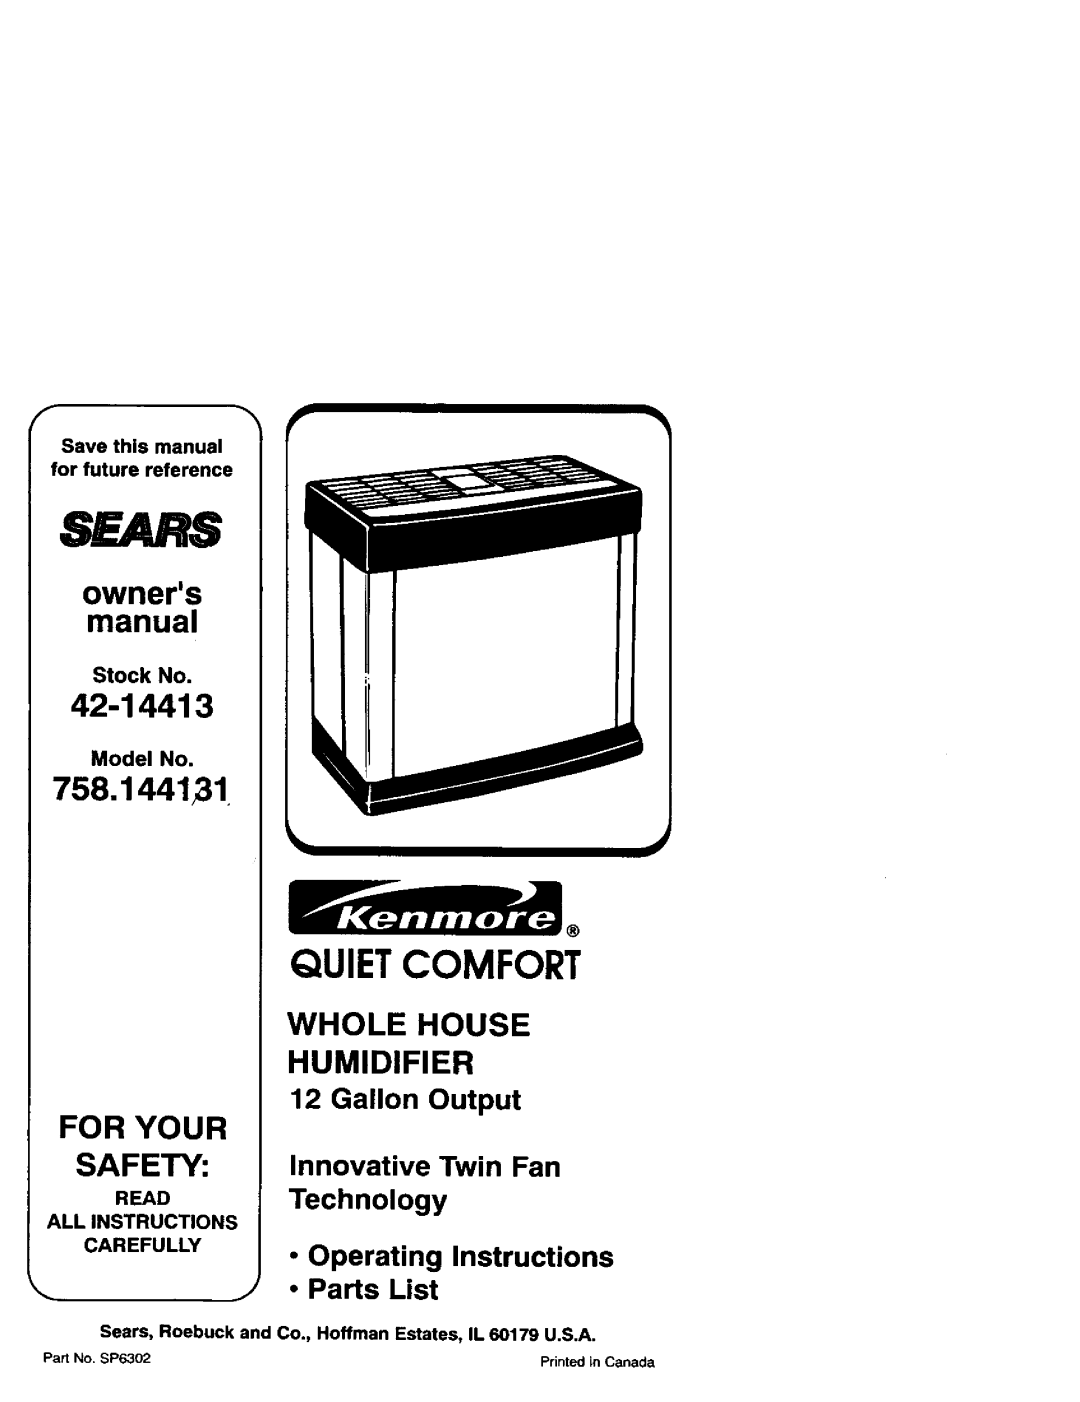 Sears 758.144131 owner manual 42-14413, owners manual, For Your Safety, Sears, Quietcomfort, Stock No, Model No 